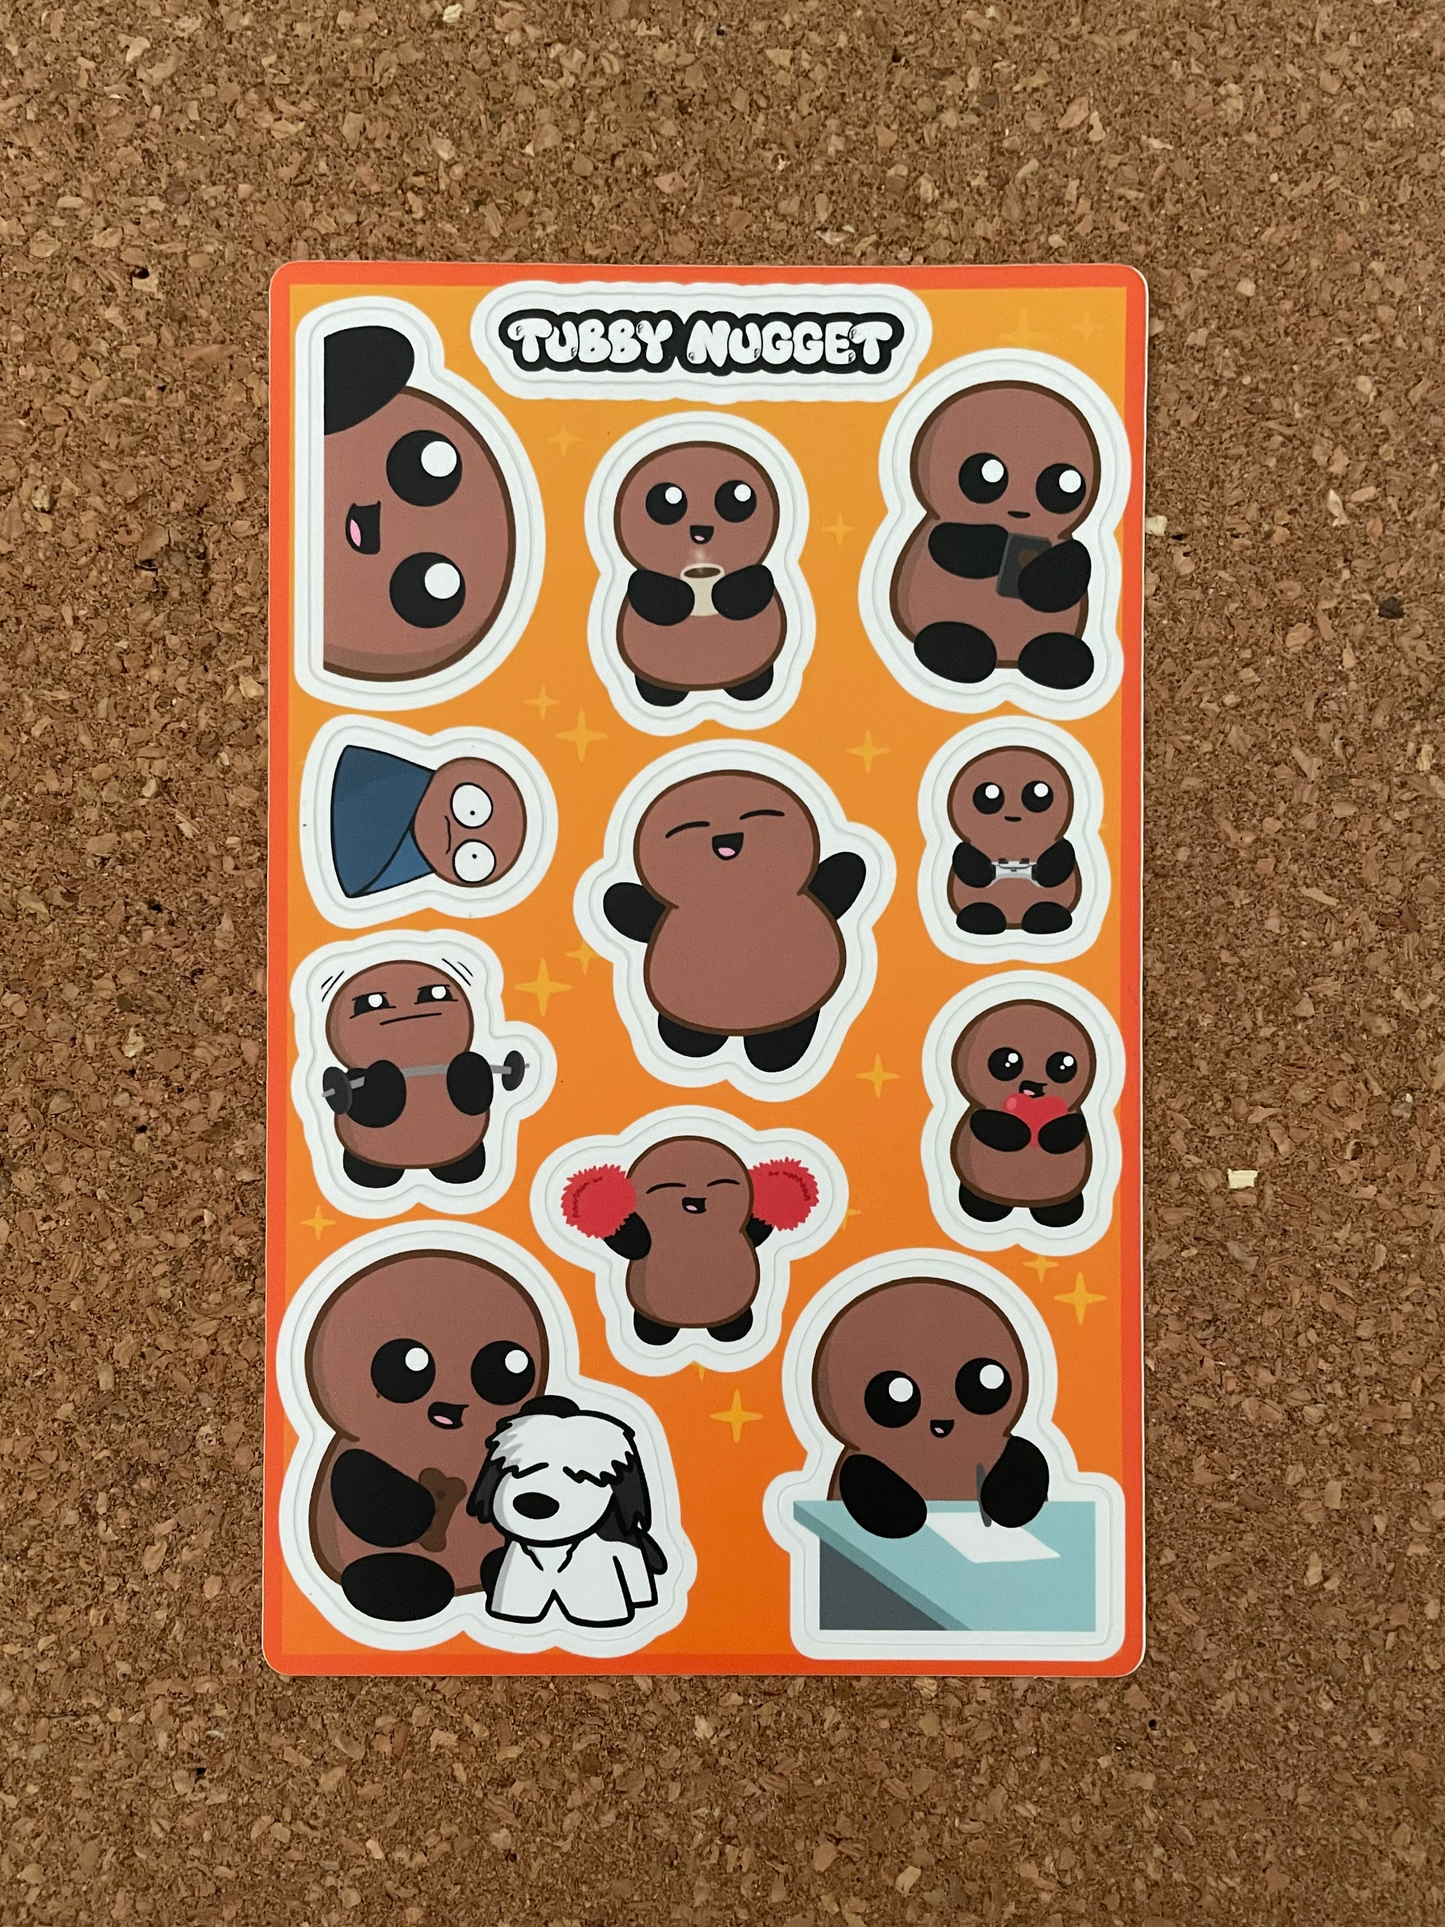 Tubby Nugget Sticker Sheets (Pack of 3!)